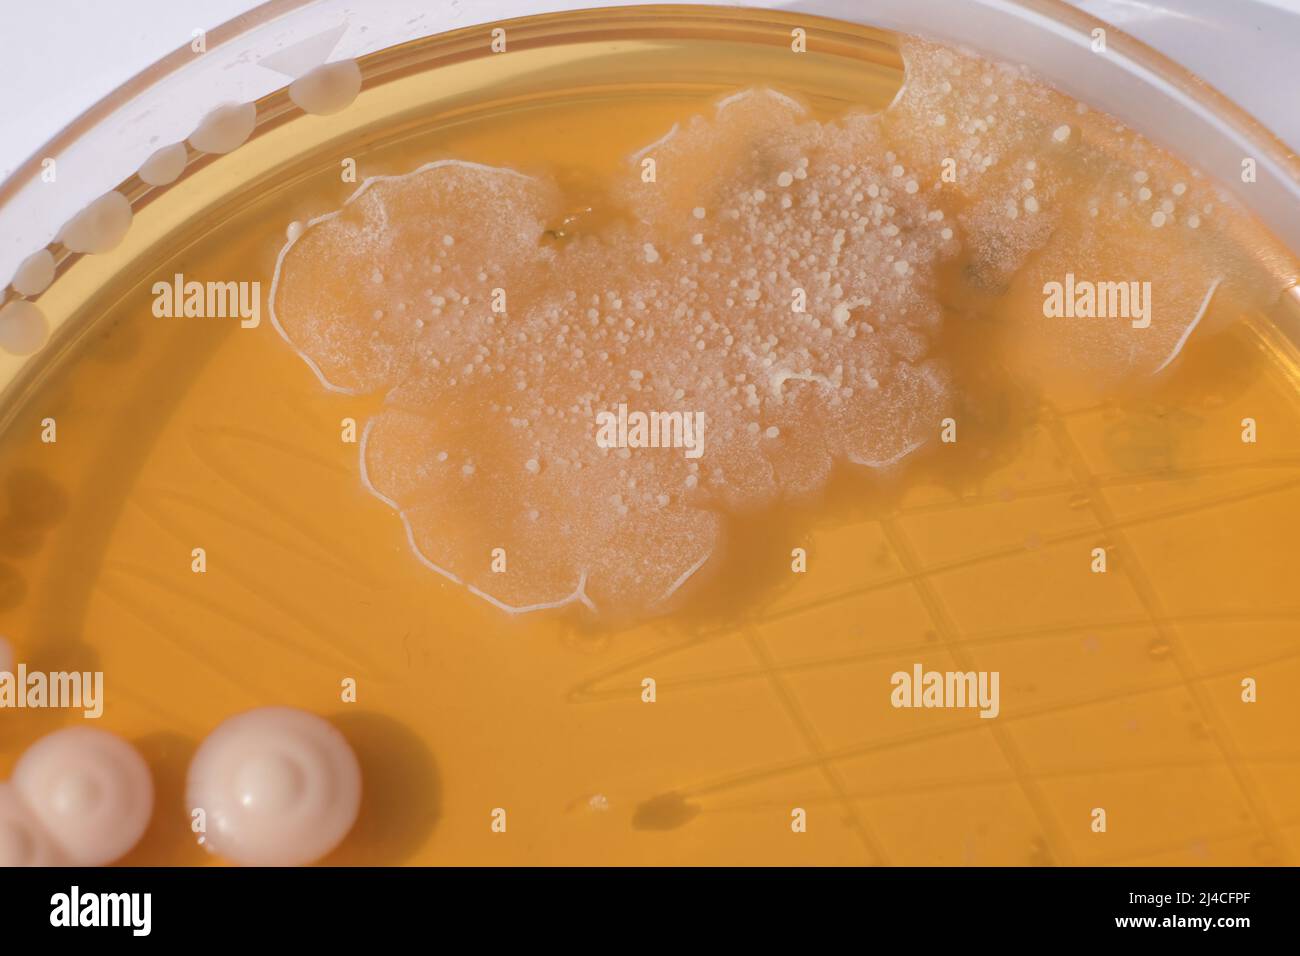 CLOSEUP PHOTO OF BACTERIA AND FUNGI GRWOTH ON AGAR MEDIA IN A PLASTIC PLATE Stock Photo